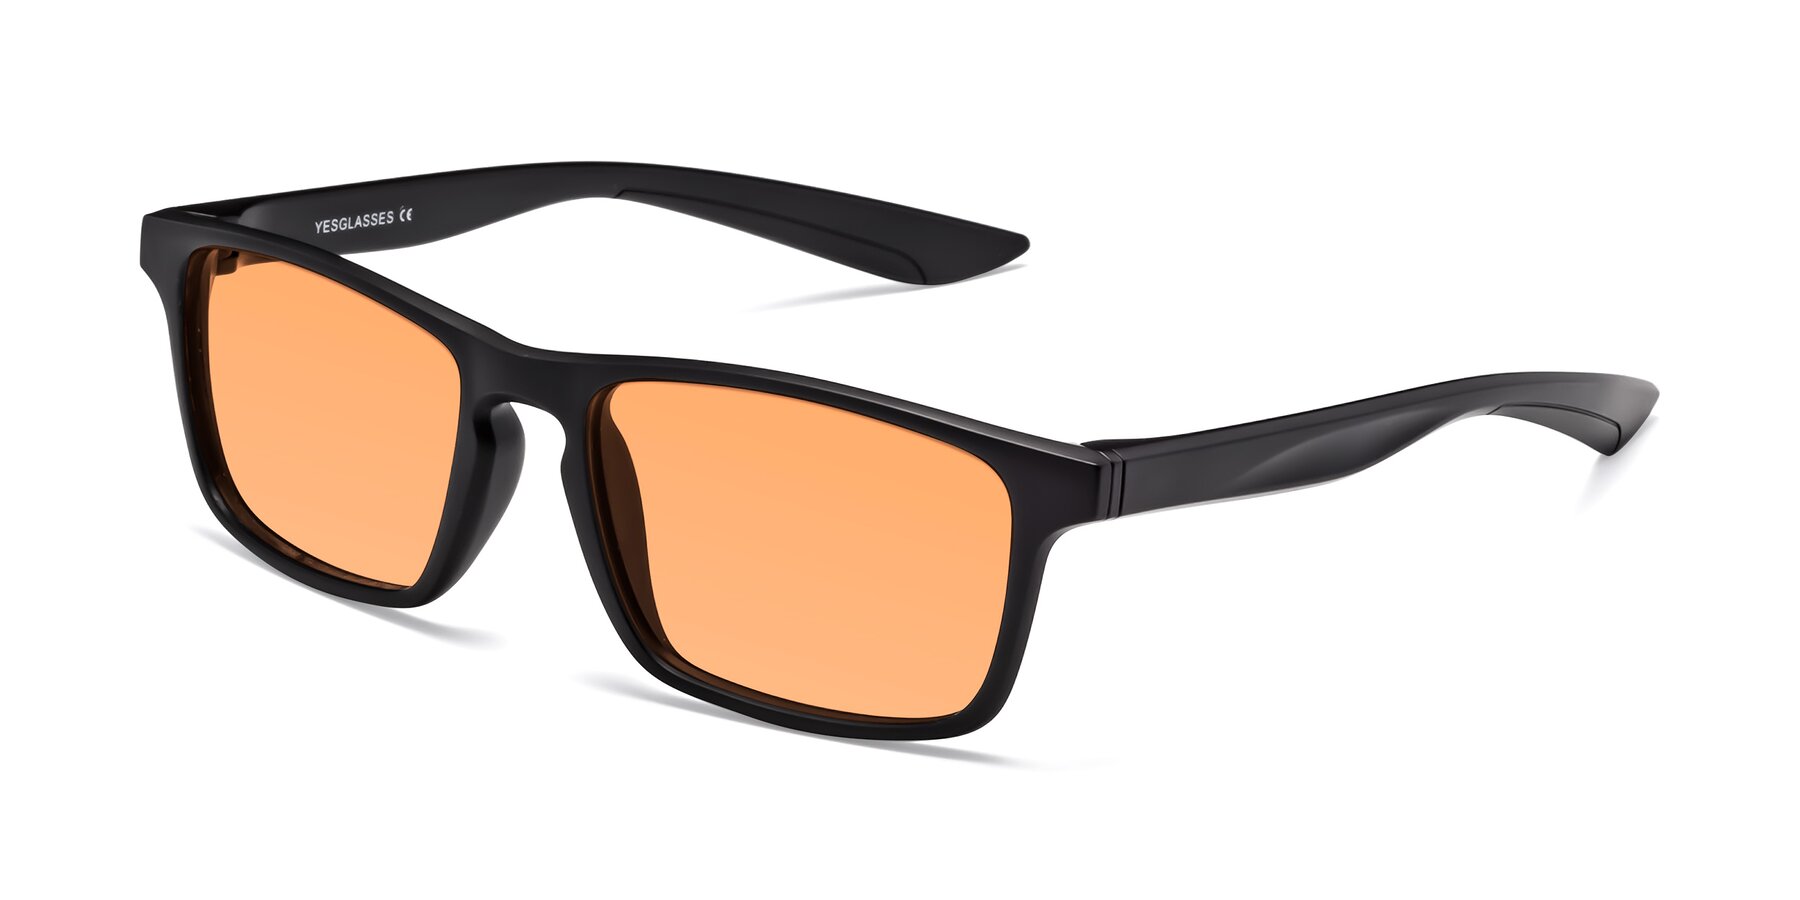 Angle of Passion in Matte Black with Medium Orange Tinted Lenses